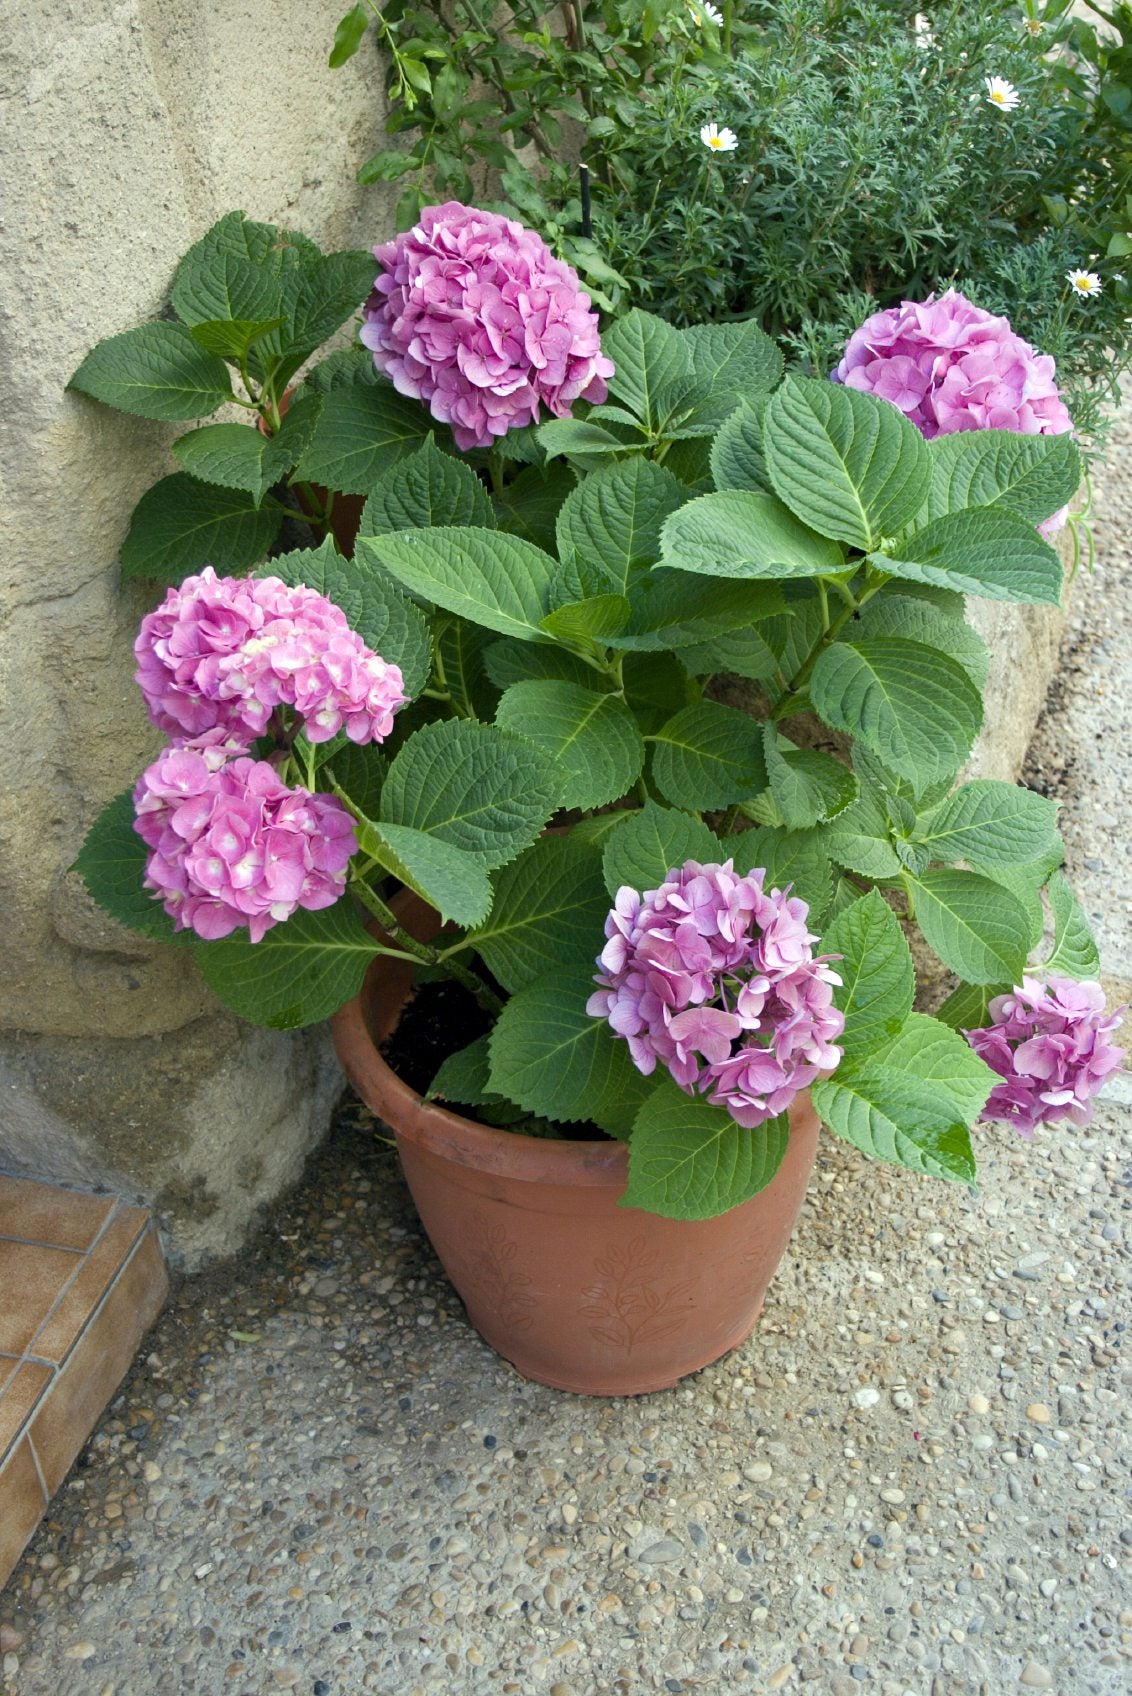 15 Tips for Growing Hydrangeas in Containers